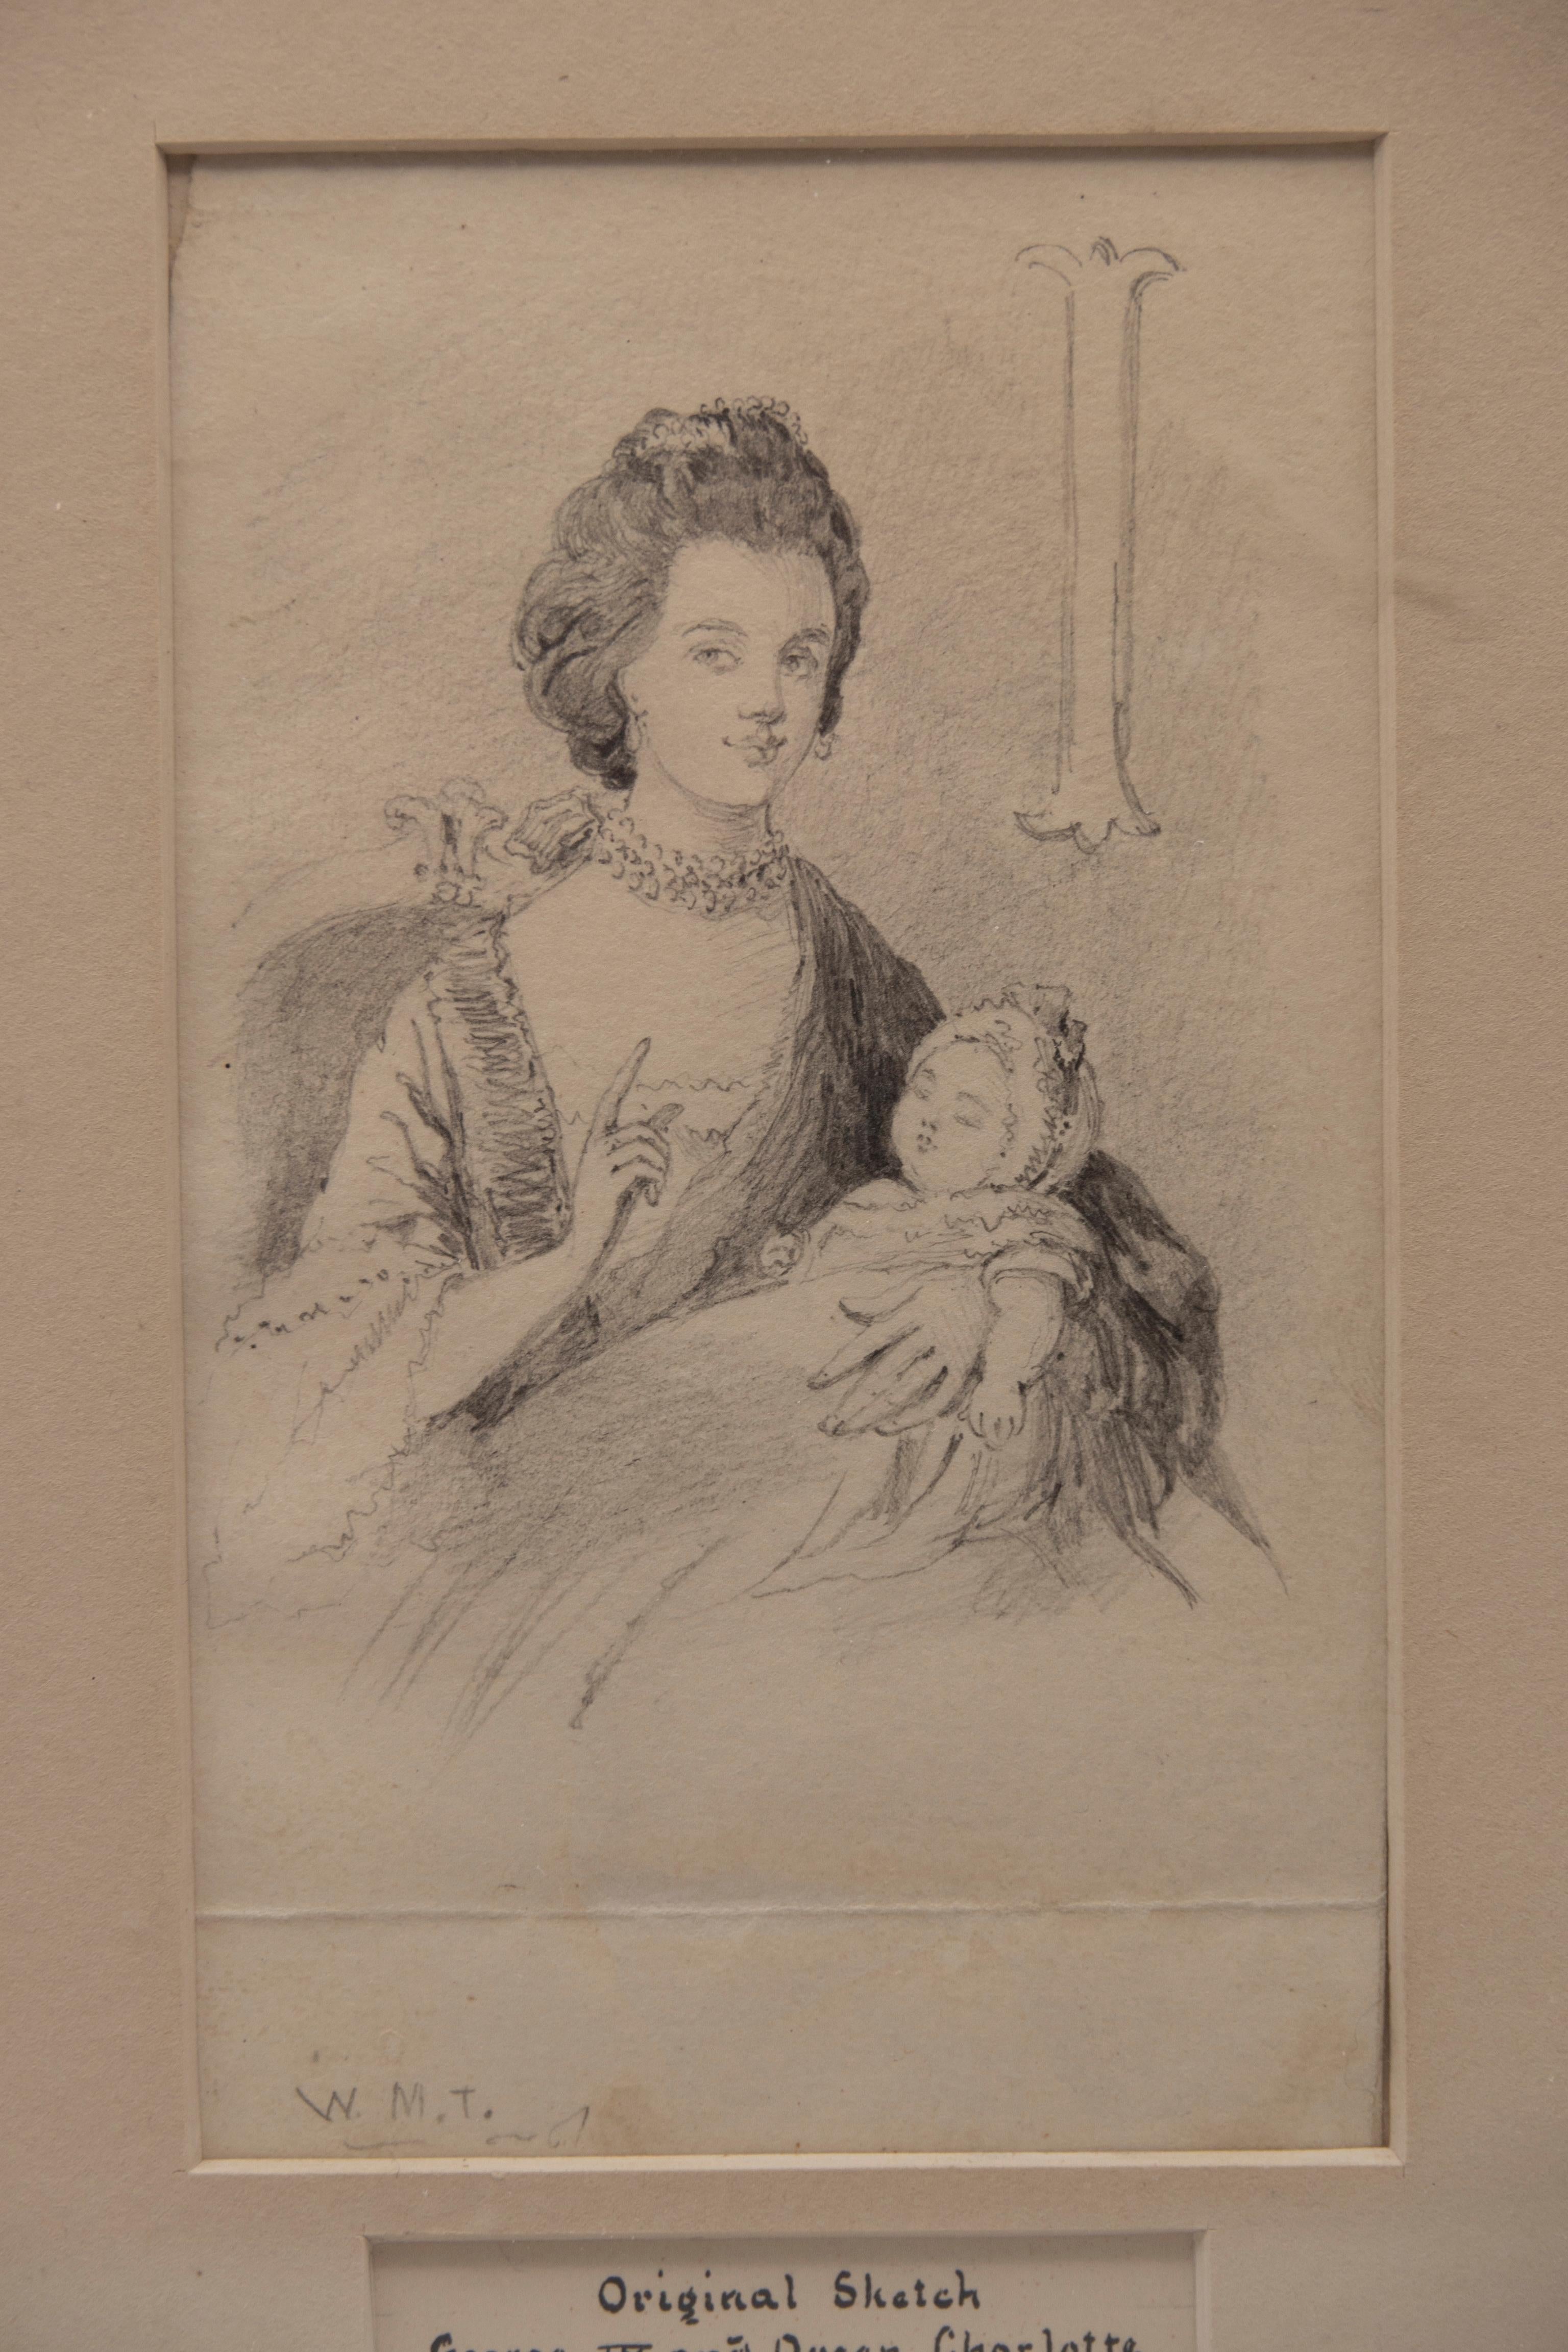 English Pencil Drawing Of George IV By William M. Thackeray From The Hearst Collection